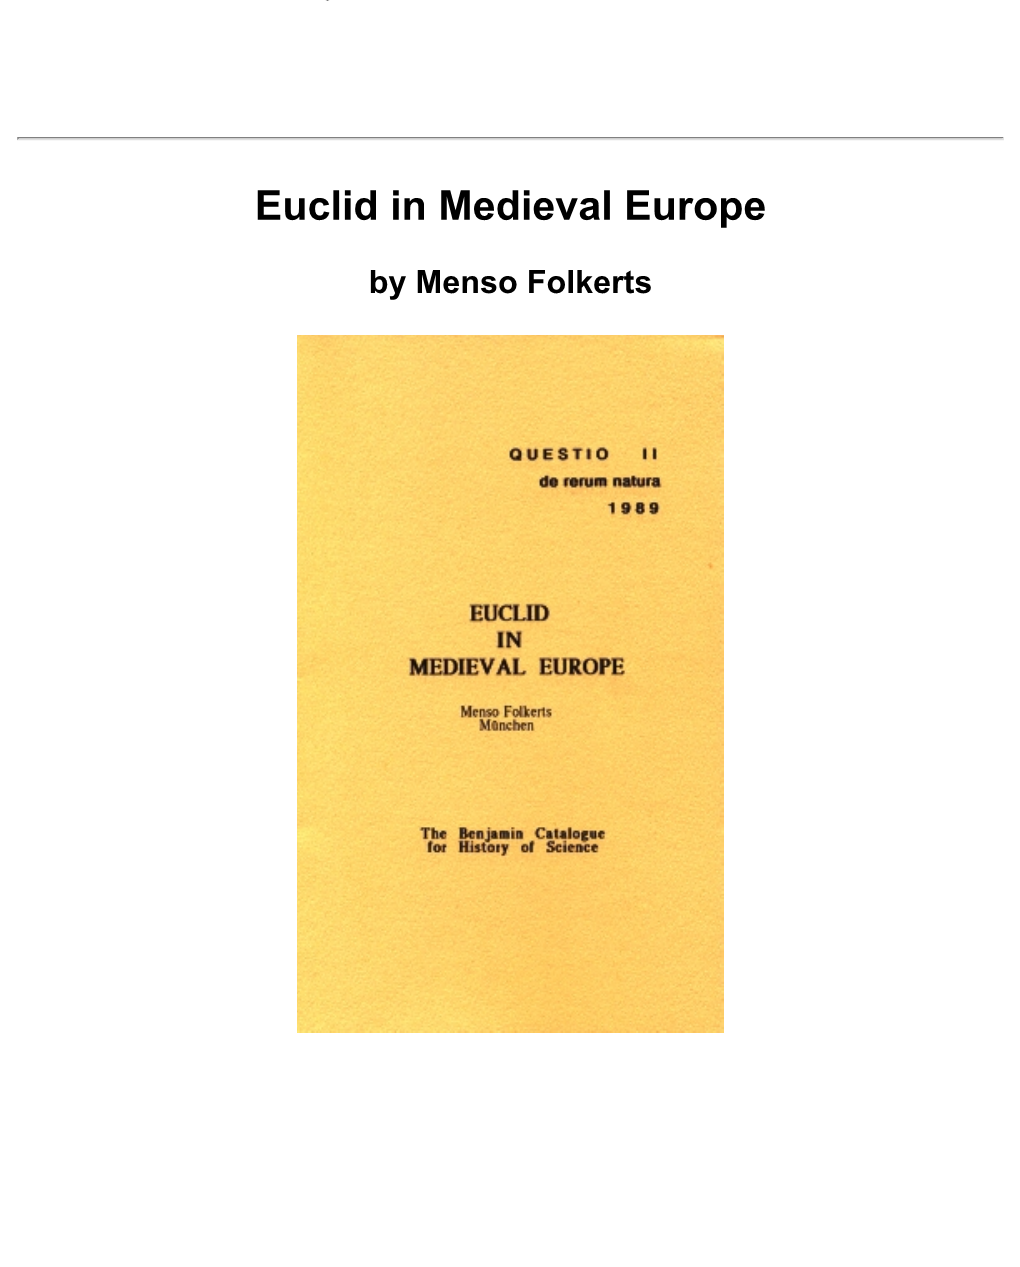 Menso Folkerts' Medieval List of Euclid Manuscripts